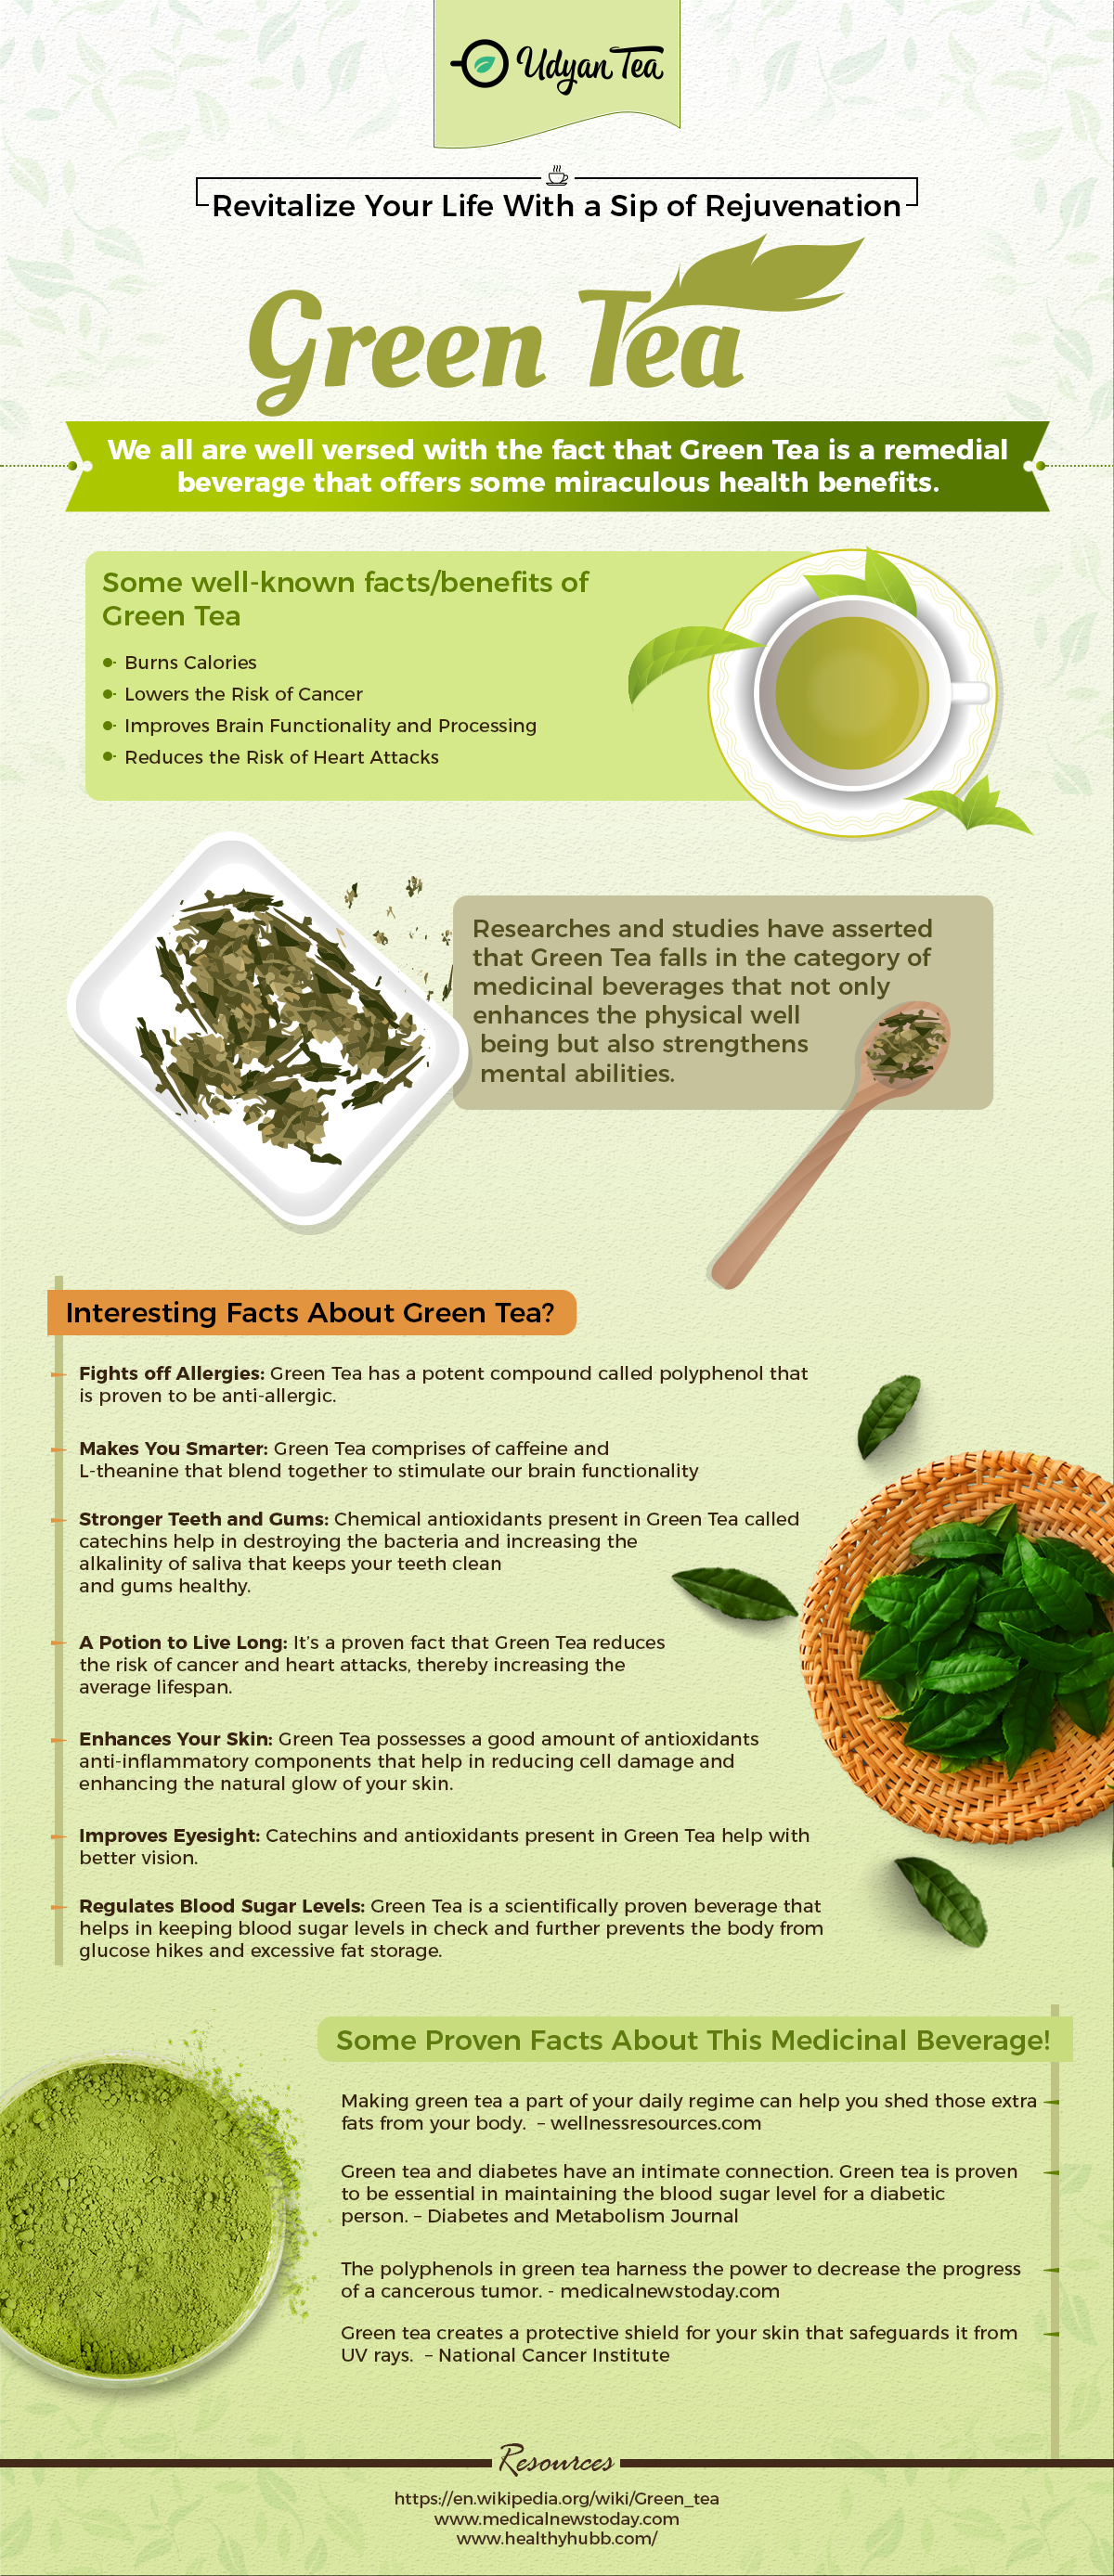 About Green Tea